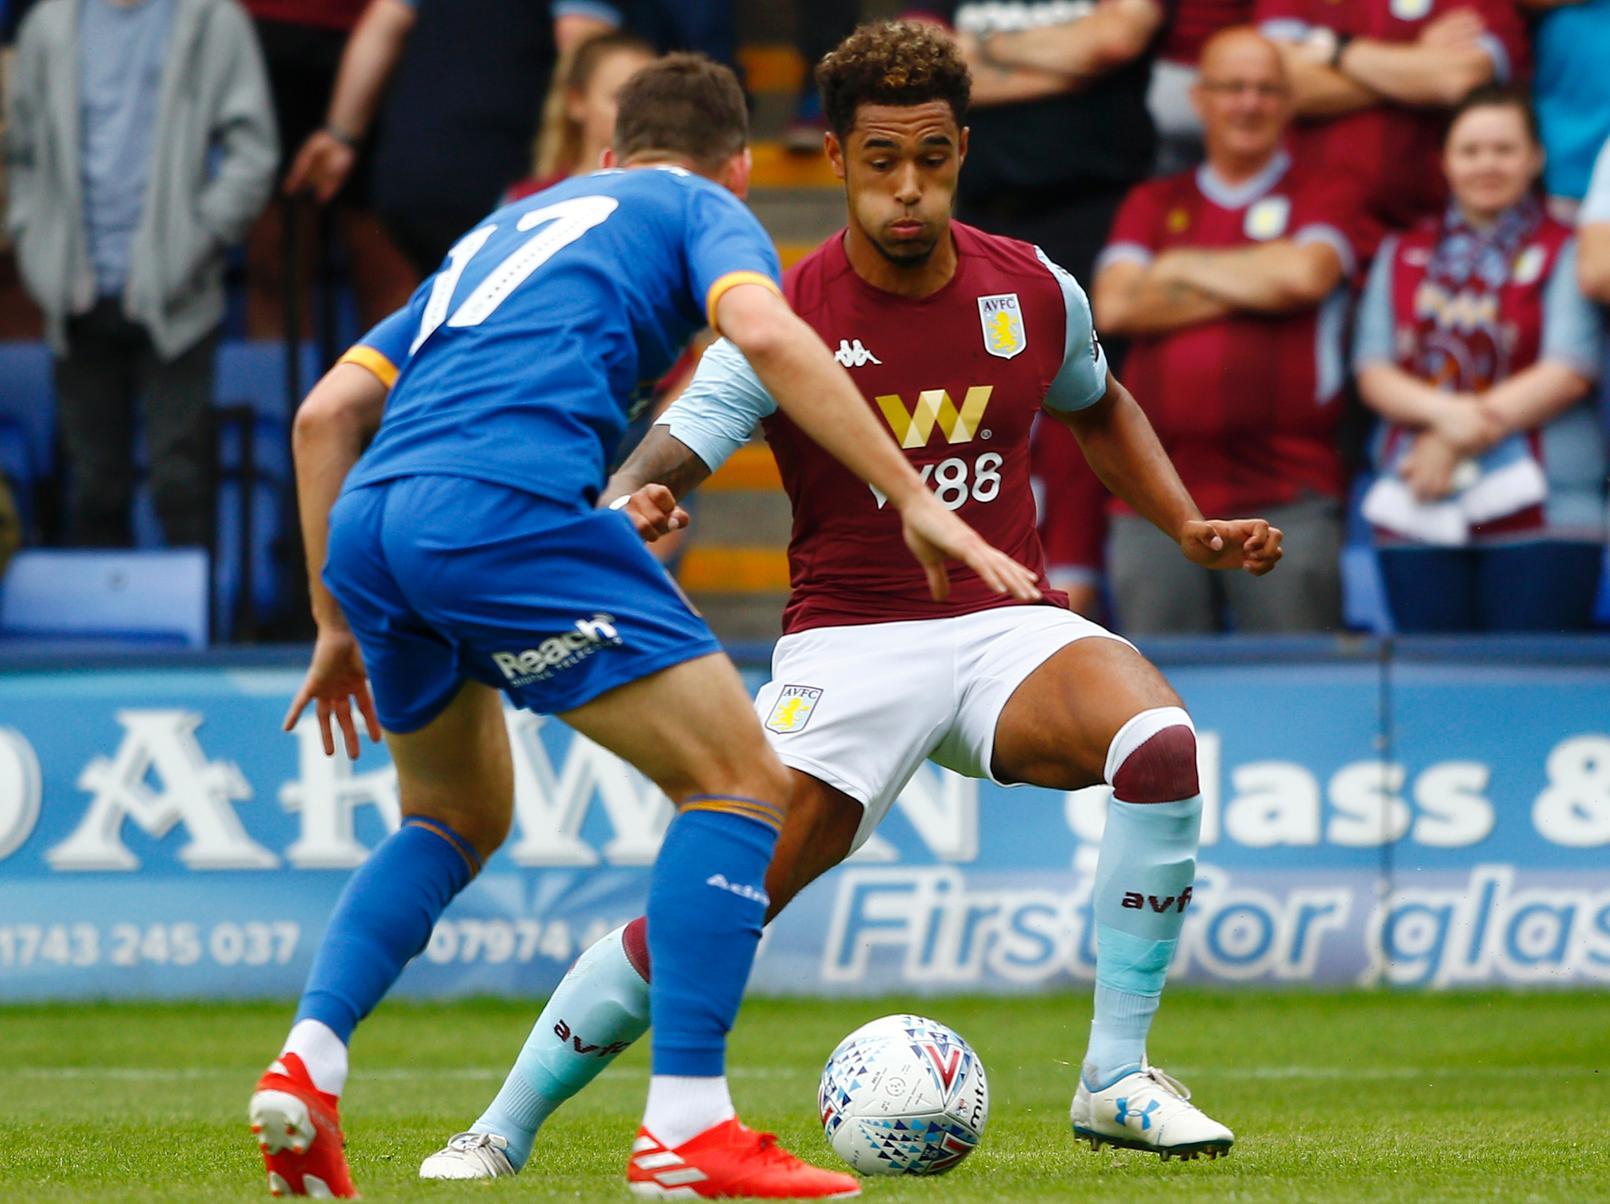 Aston Villa winger became the Addicks first signing of the window and has made a fine start, scoring twice in five games so far. Has been on loan at Portsmouth and Preston North End previously.,